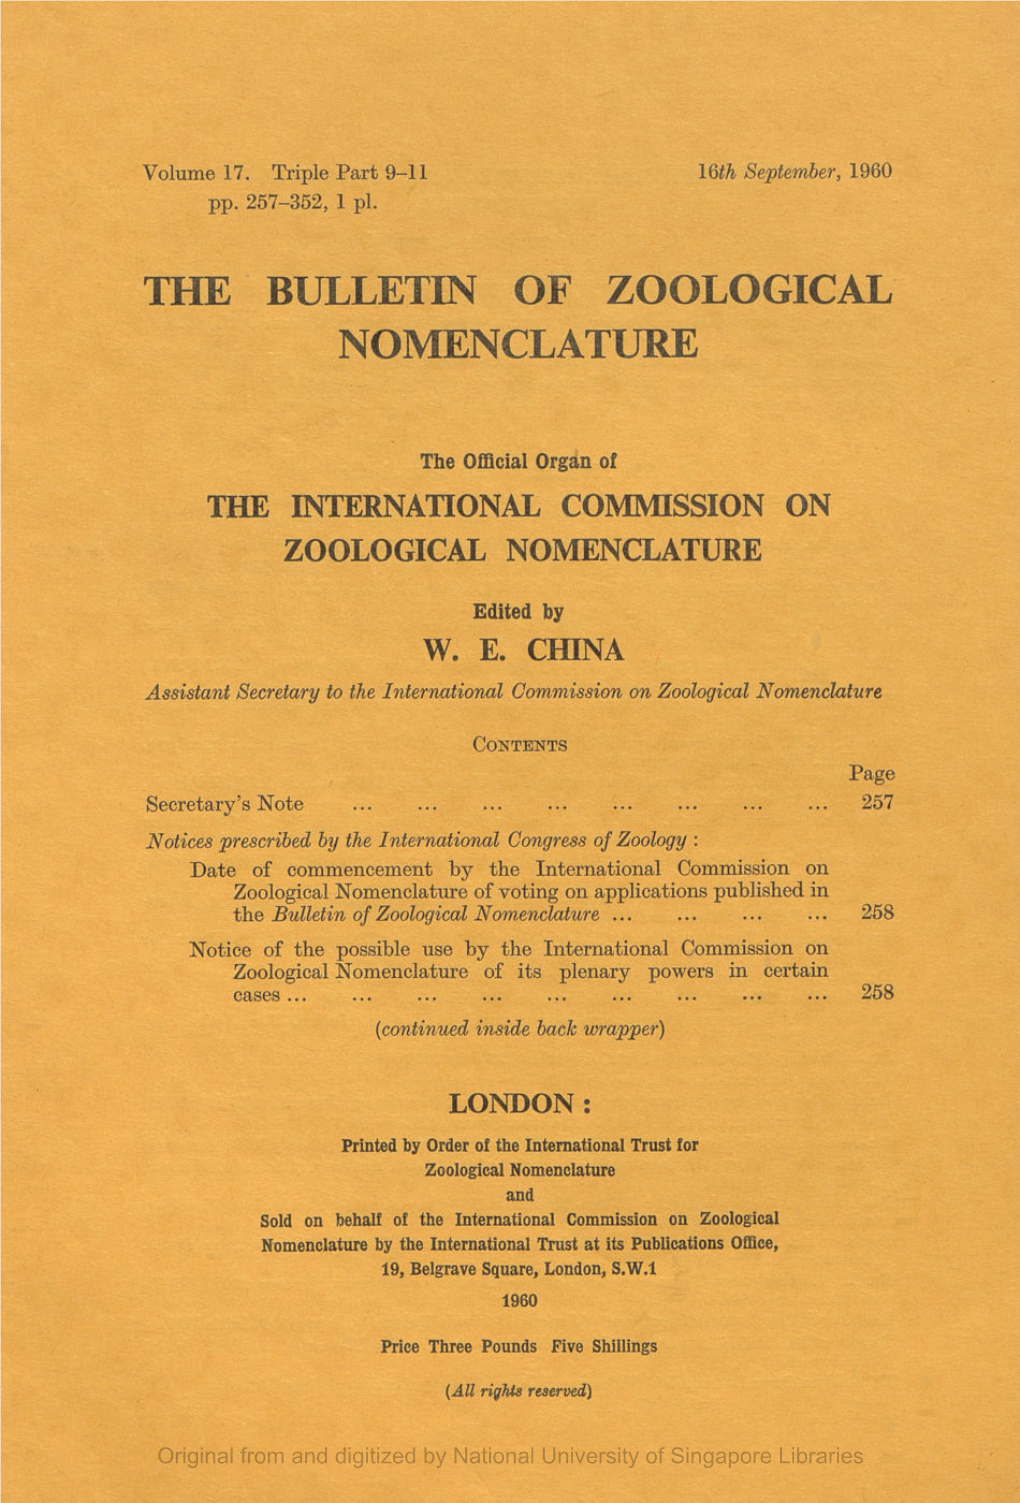 The Bulletin of Zoological Nomenclature, V17 Part09-11